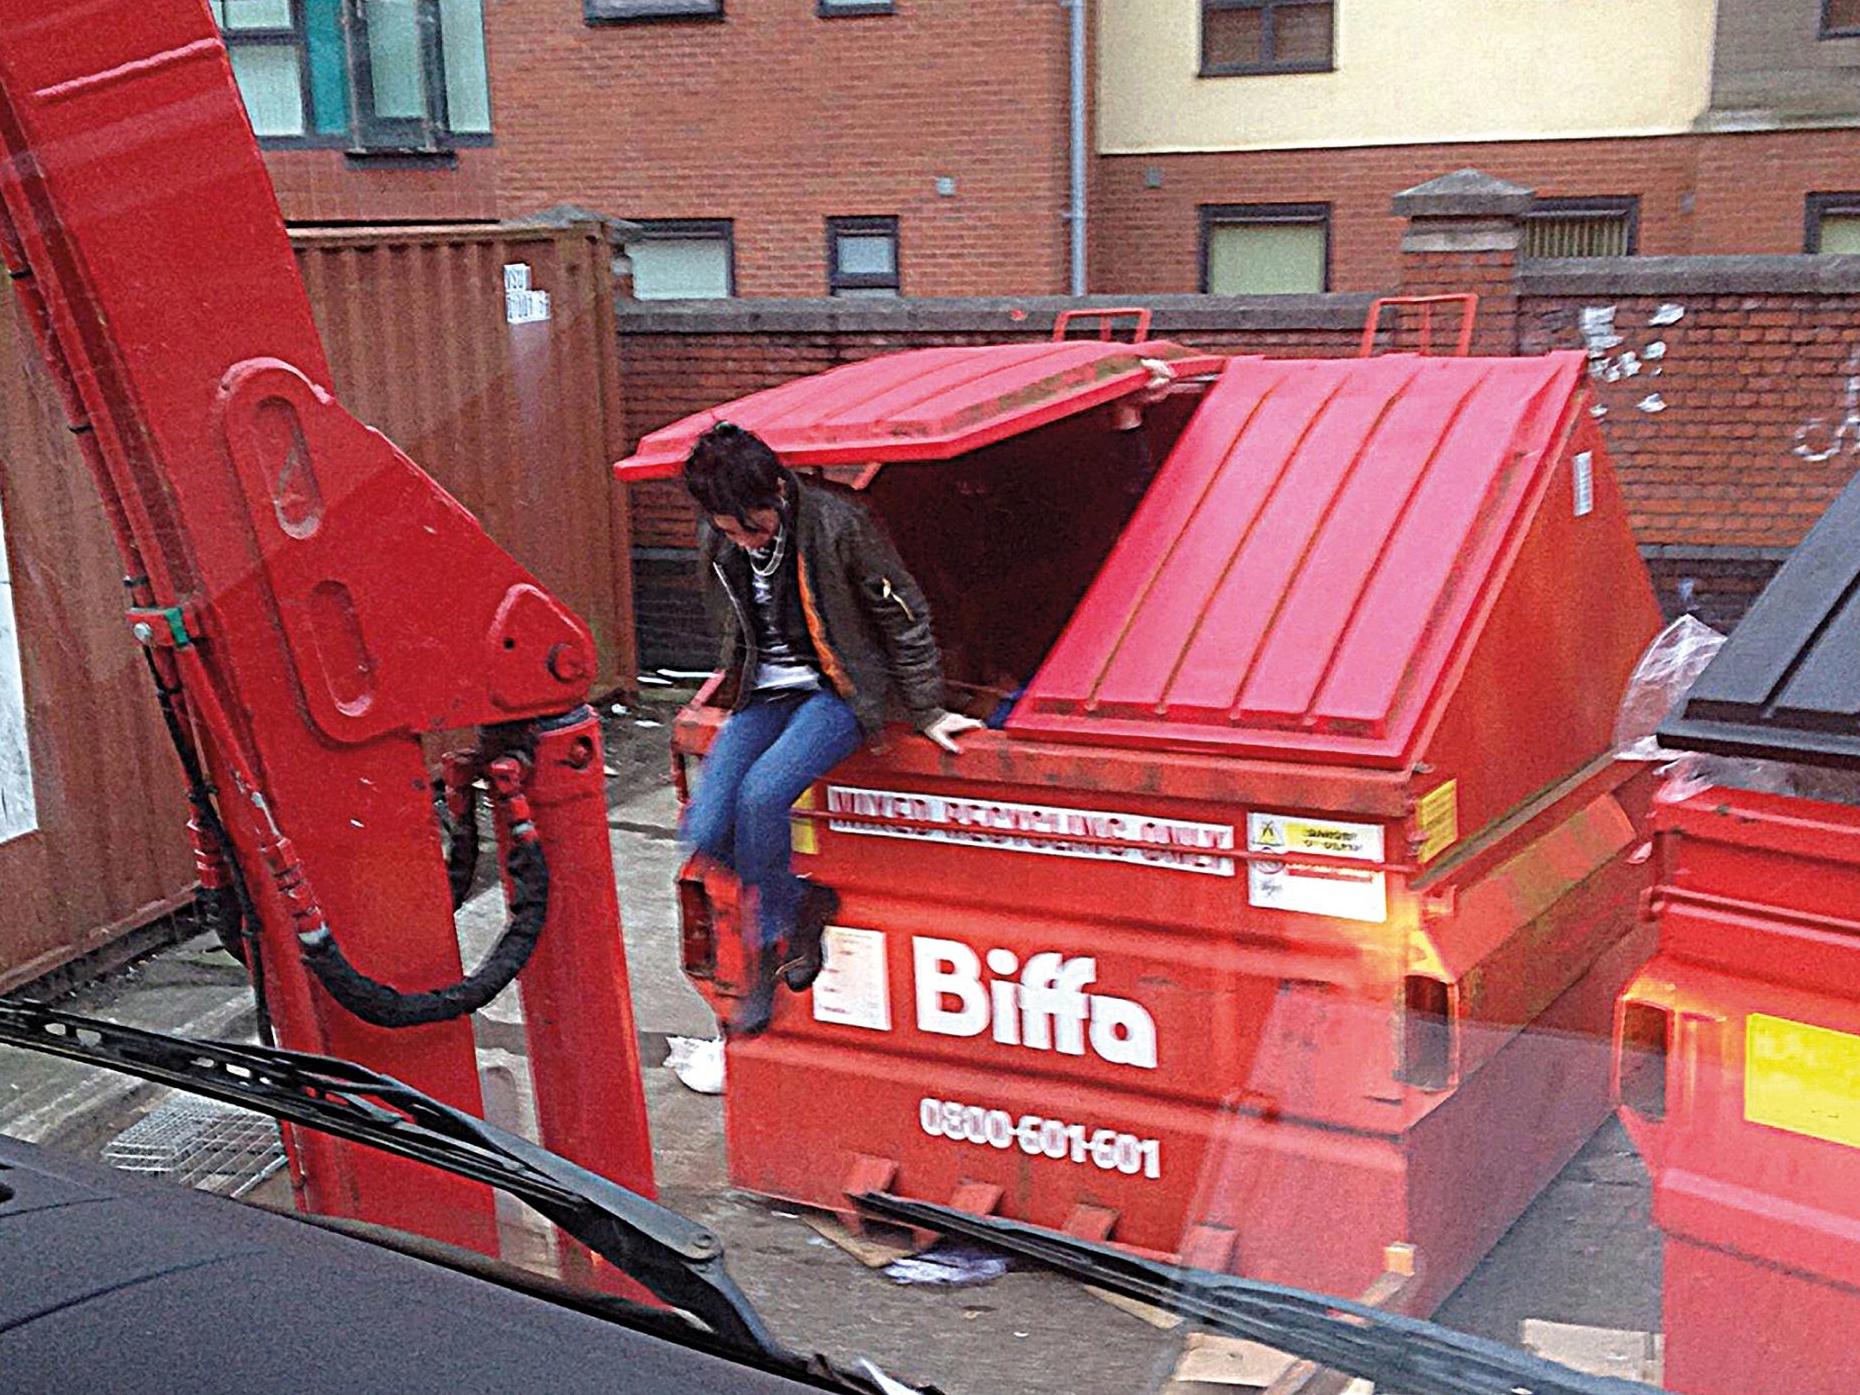 A rough sleeper emerges from a waste unit